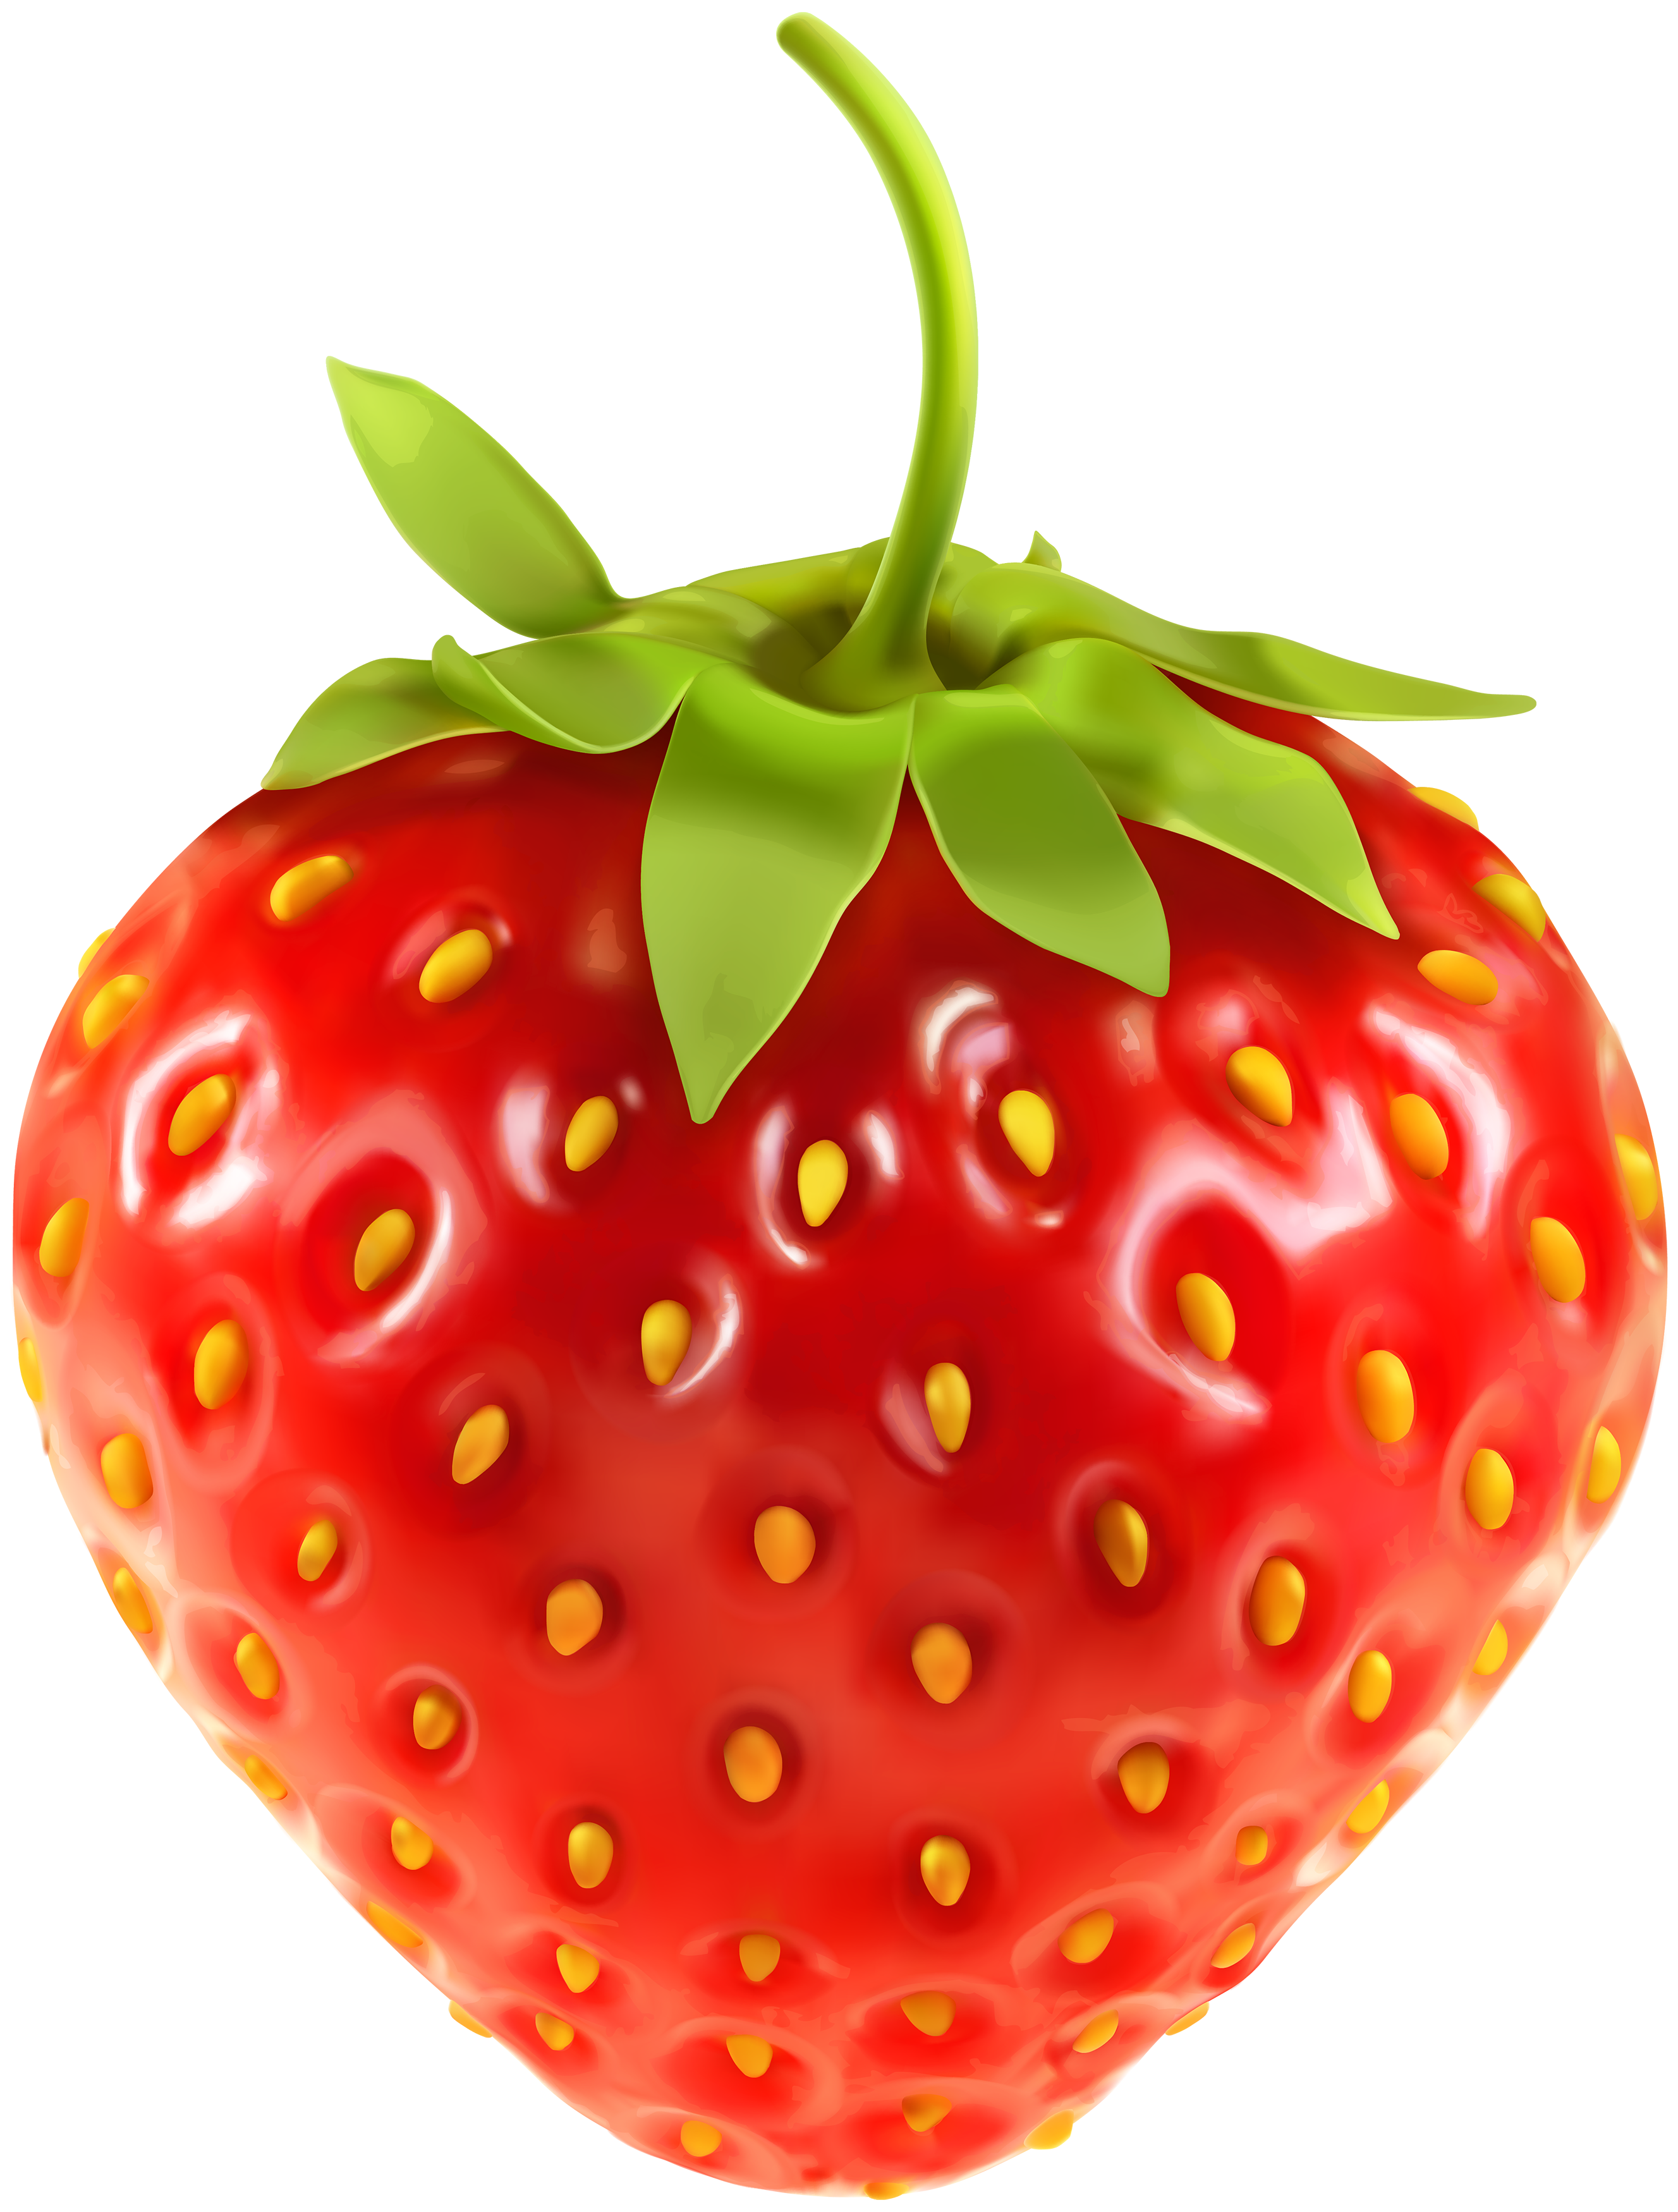 Strawberry Strawberry Fruit Downloadclipart Org Png Image Clipart